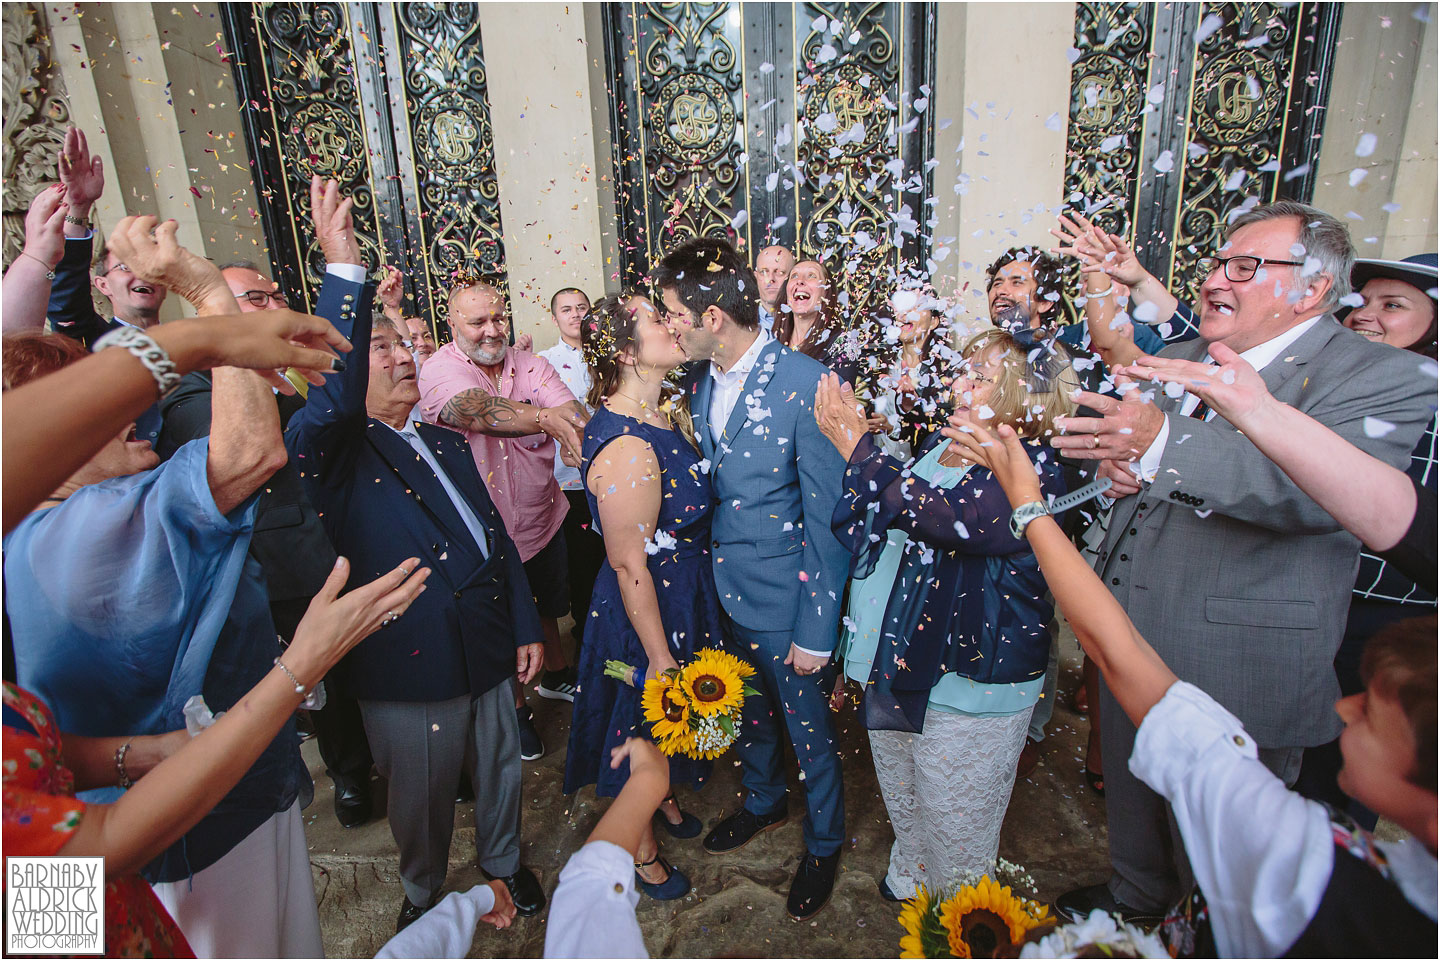 Wedding confetti Photo at Leeds Town Hall in the City centre